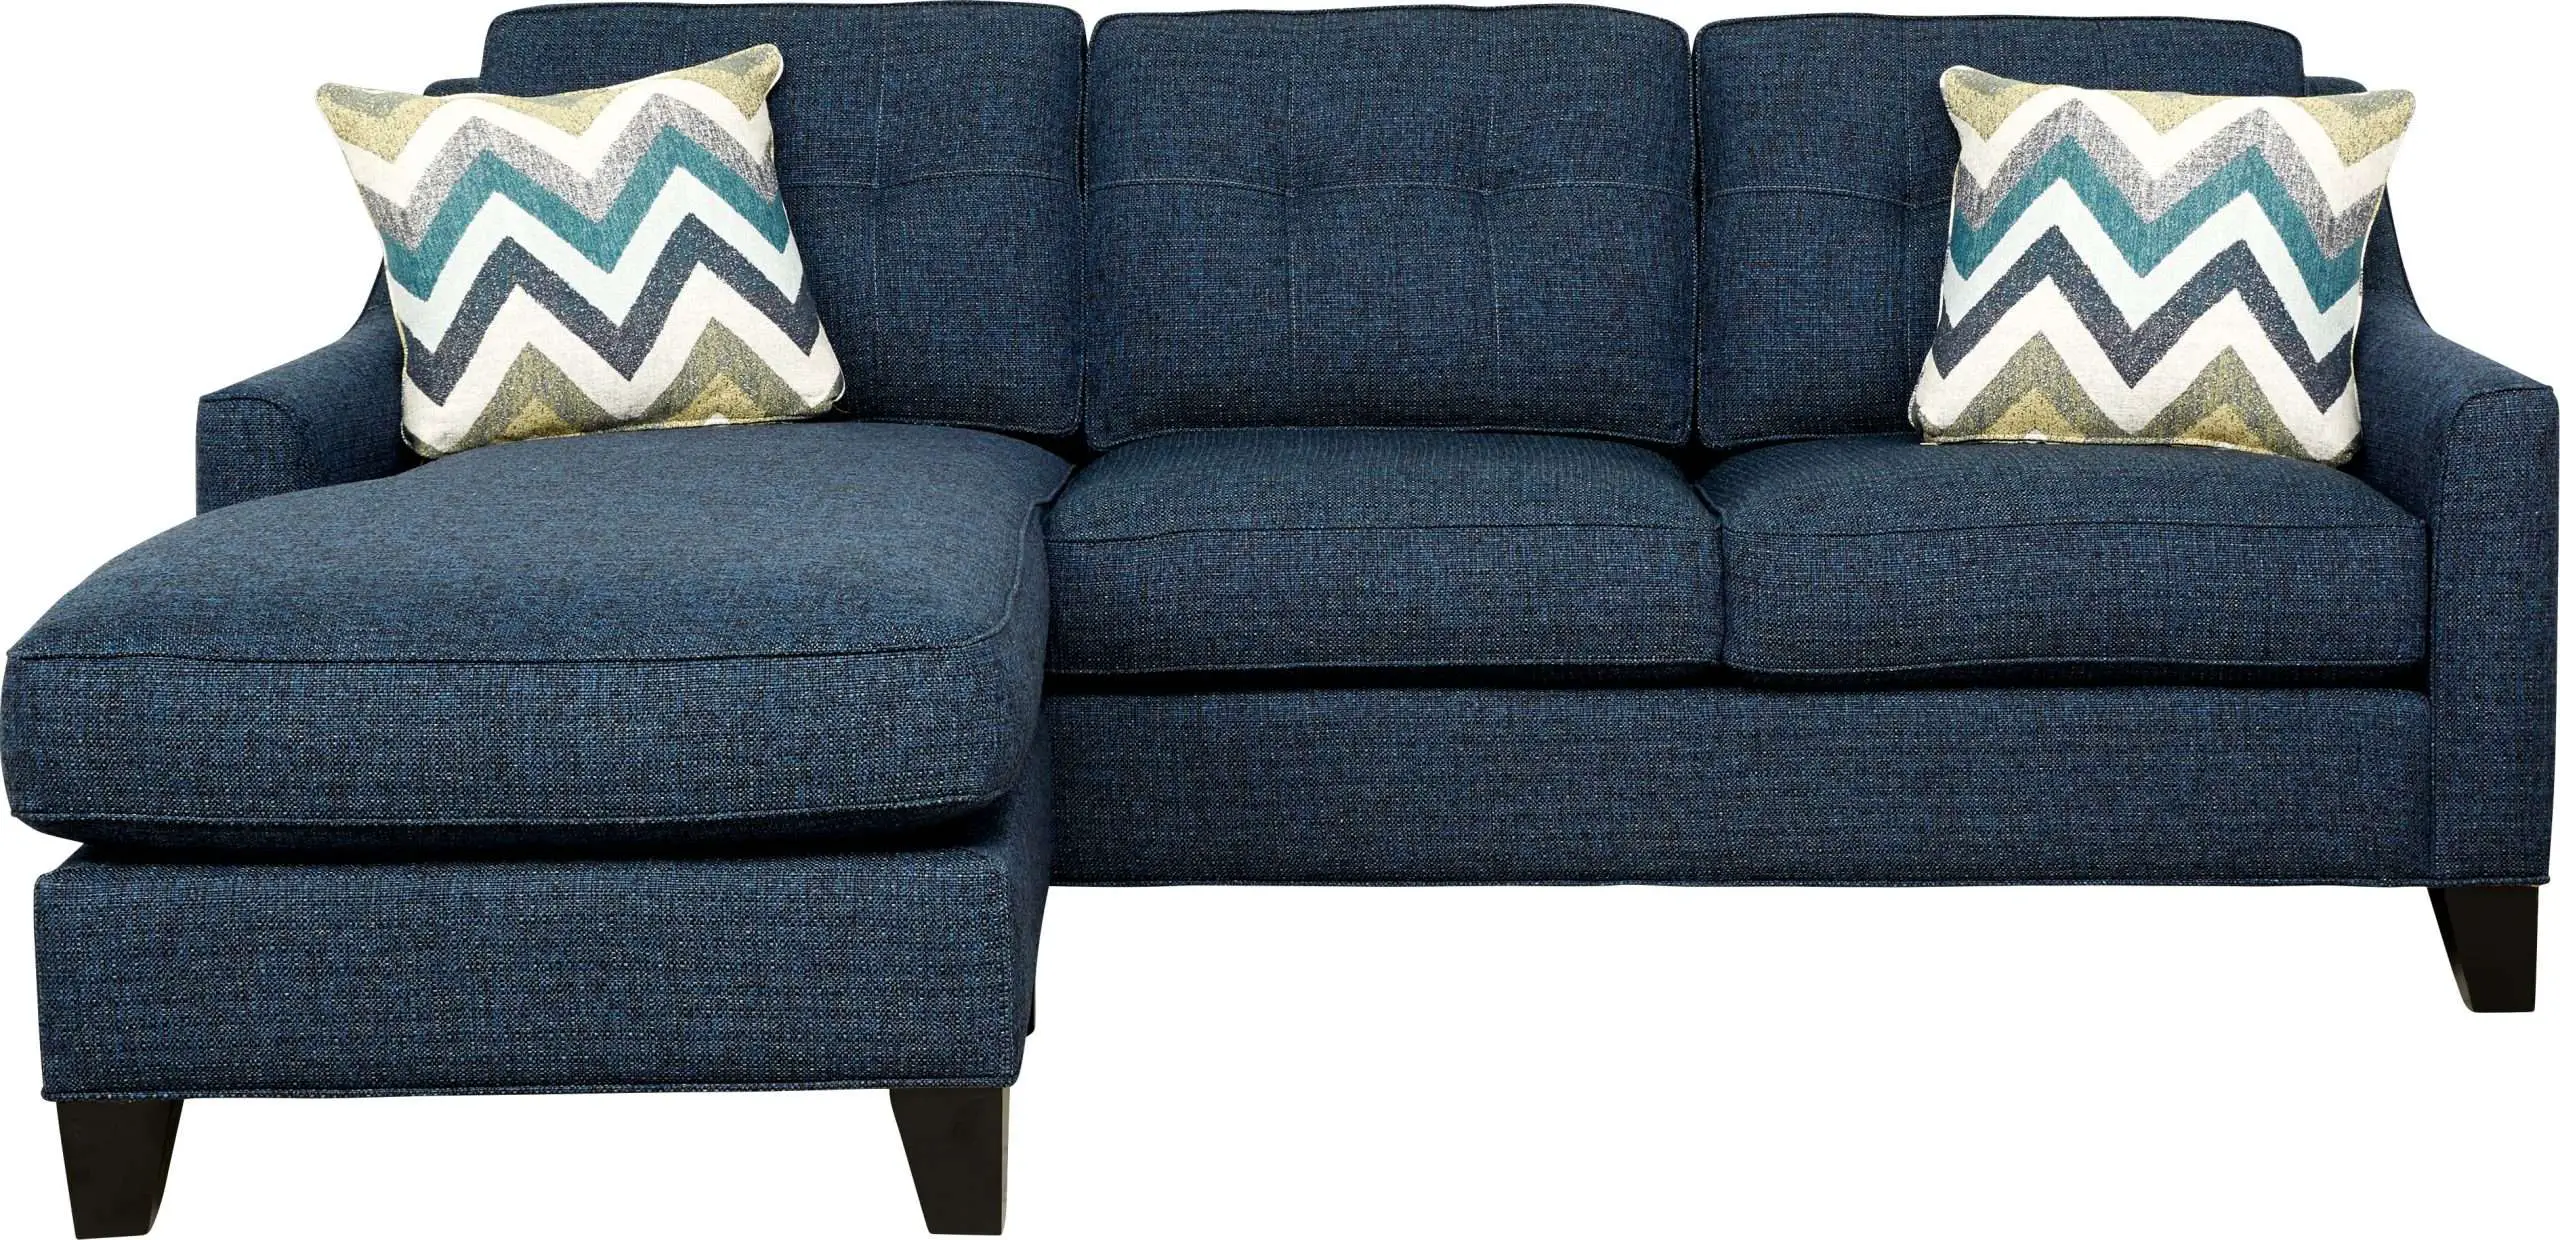 Cindy Crawford Home Madison Place Midnight 2 Pc Sectional ...